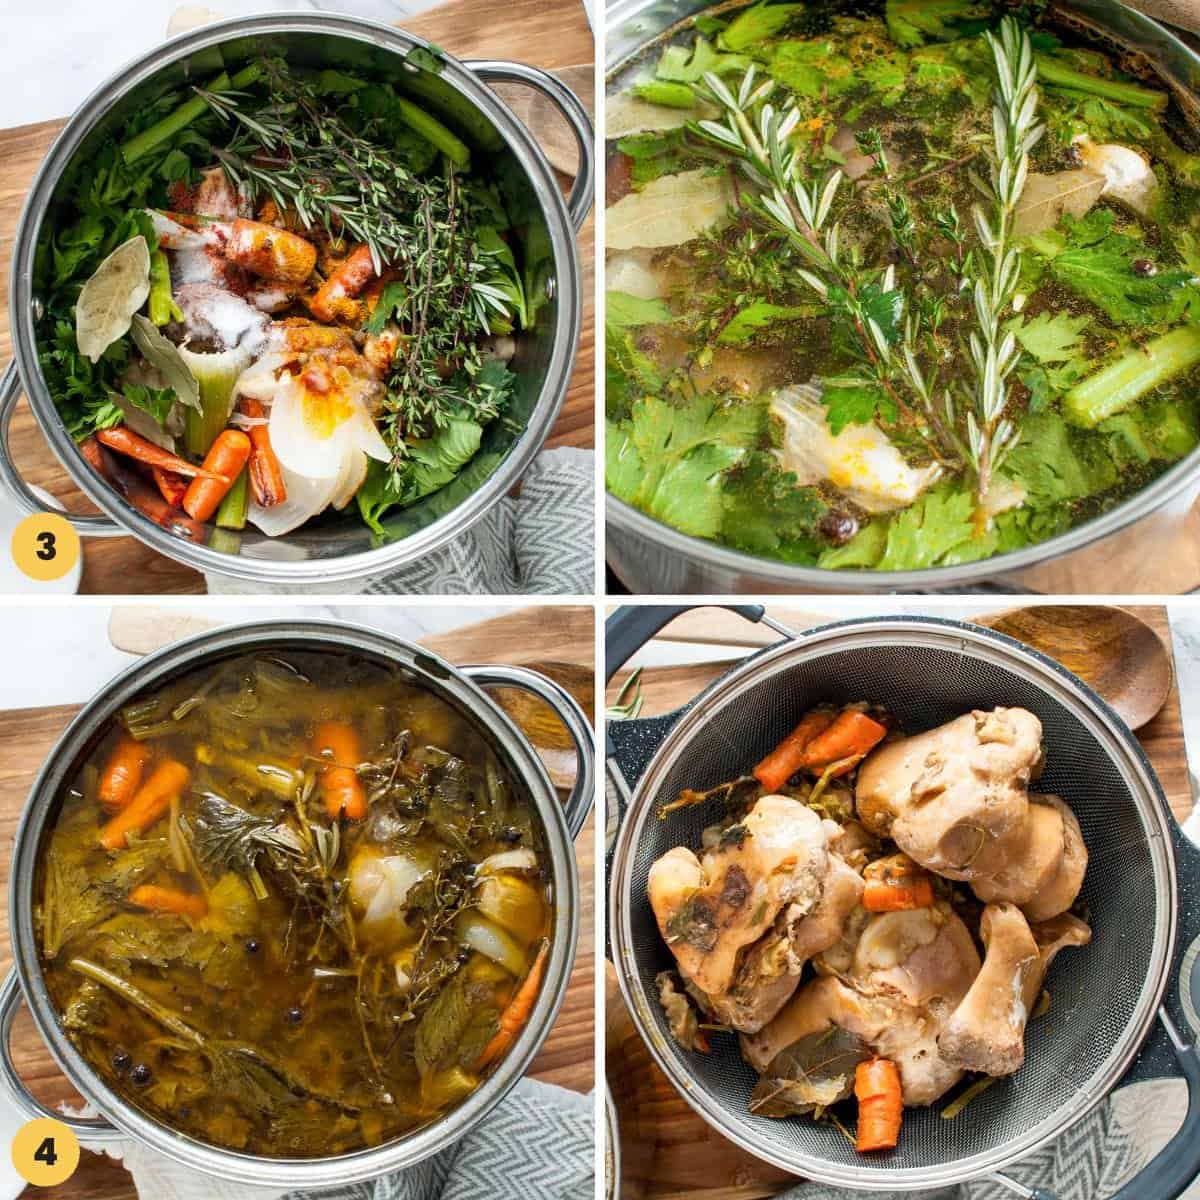 a collage of images showing how to make beef bone broth.